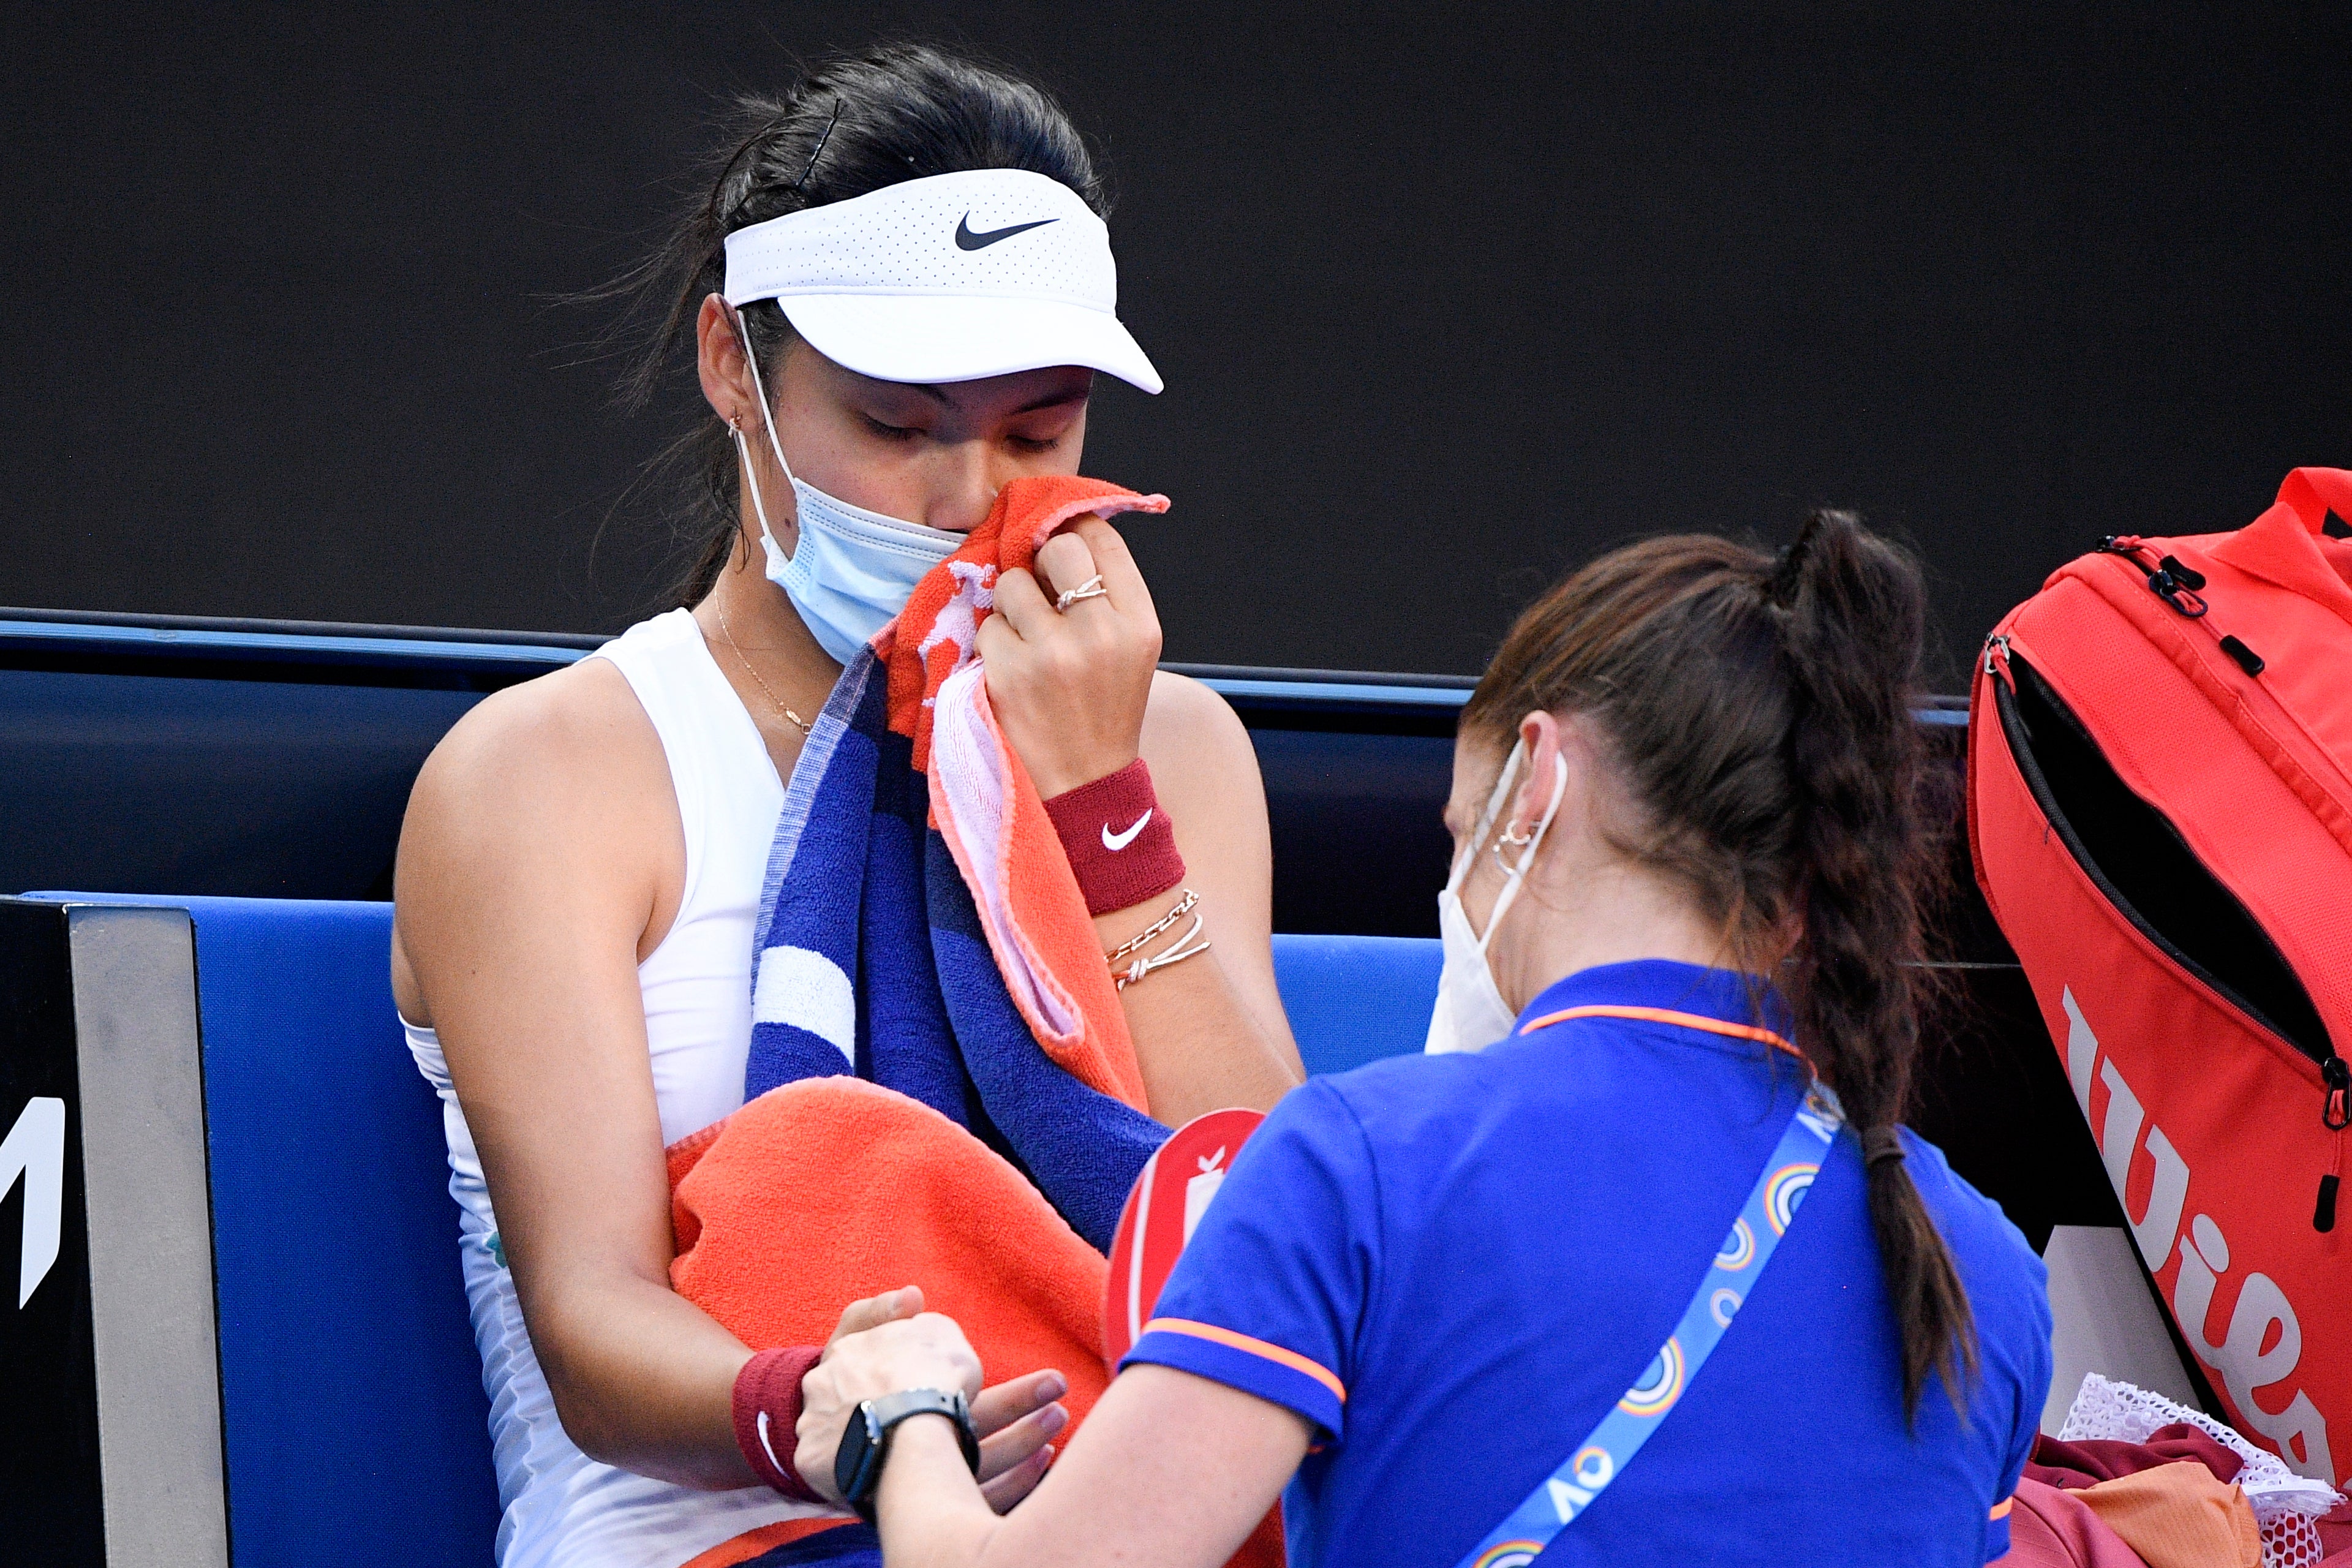 Emma Raducanu needed treatment for a deep blister on her right hand (Andy Brownbill/AP)